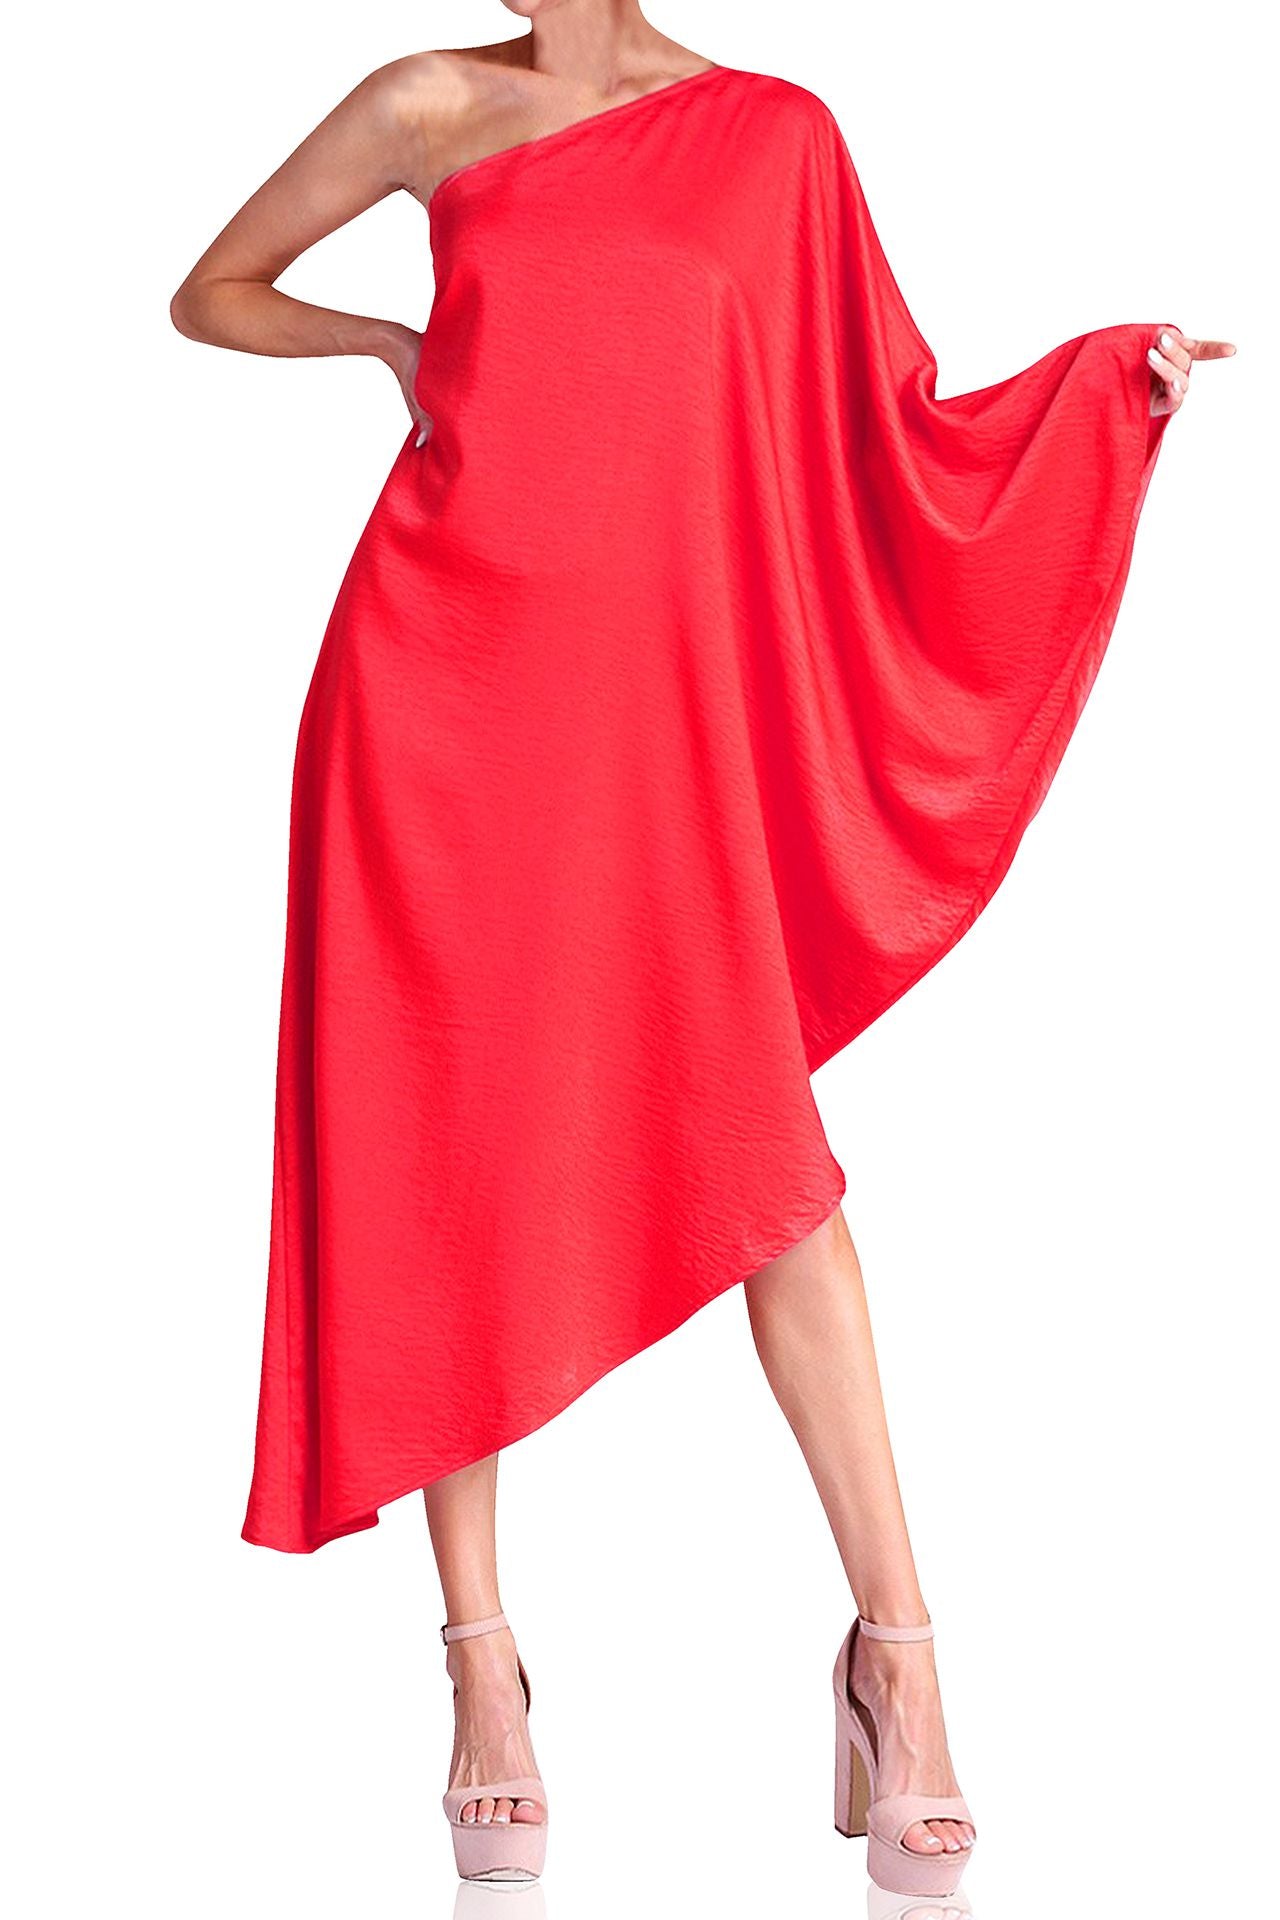 Red One Shoulder Dress for Women